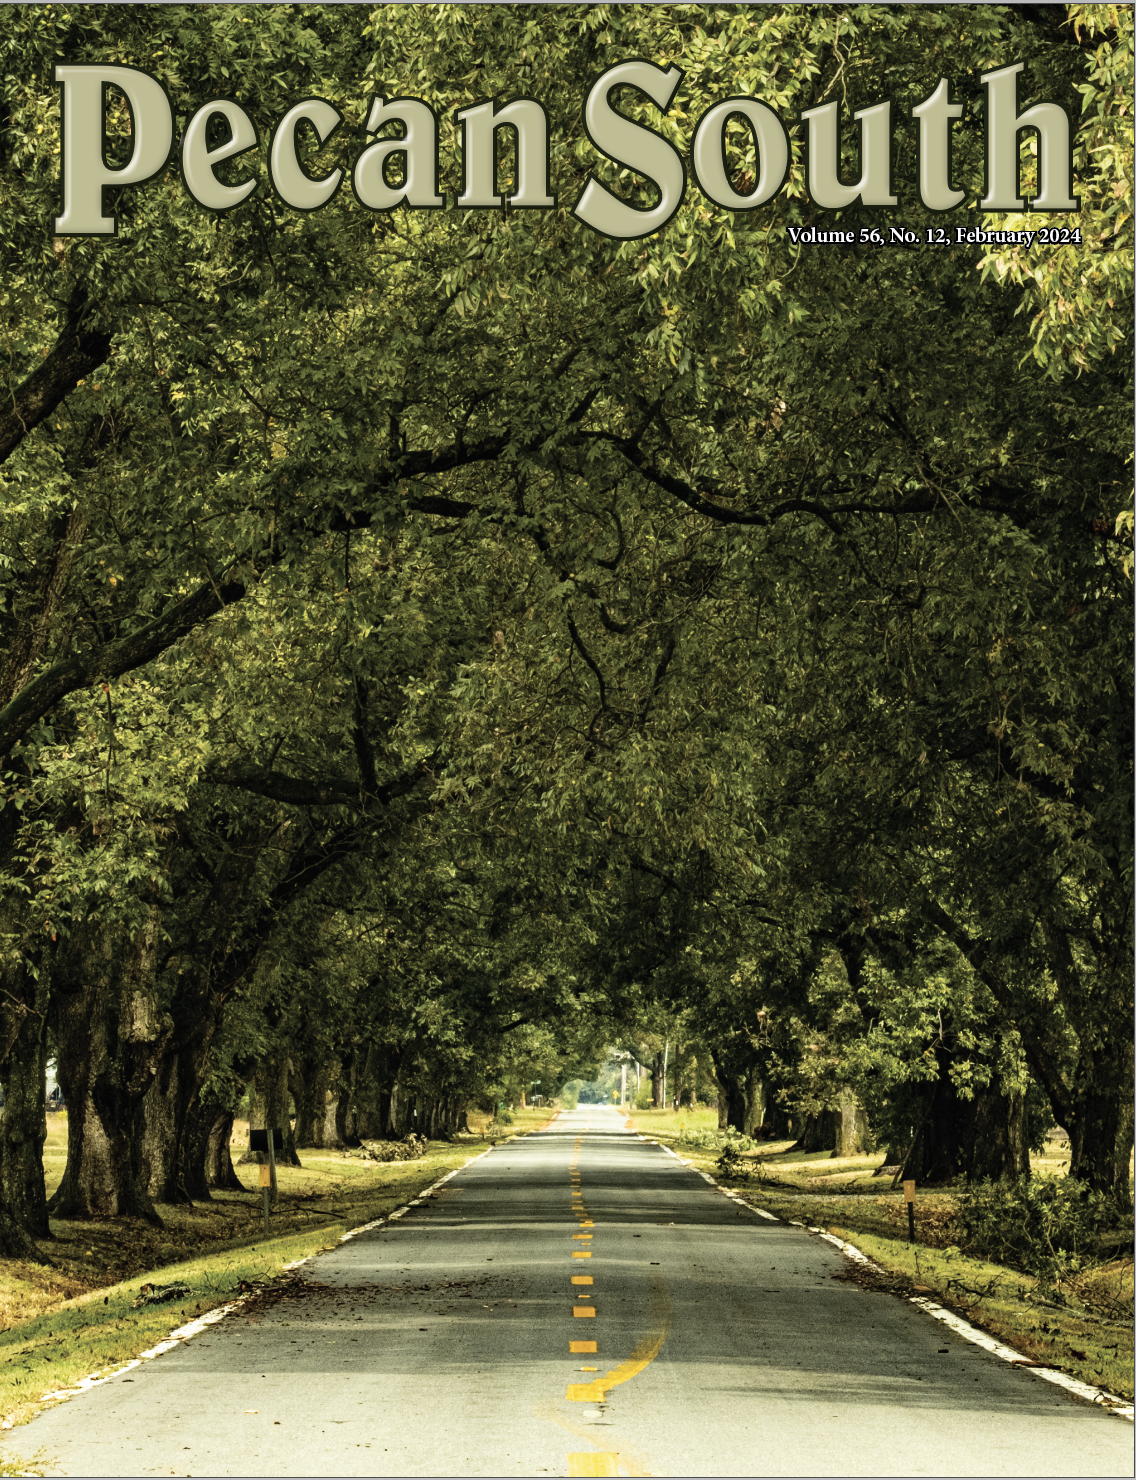 The cover of Pecan South's February 2024 issue features the logo at the top and a photo of a road leading between two rows of mature pecan trees. The canopies of the trees stretch across the road and form a dark green arch down the road.